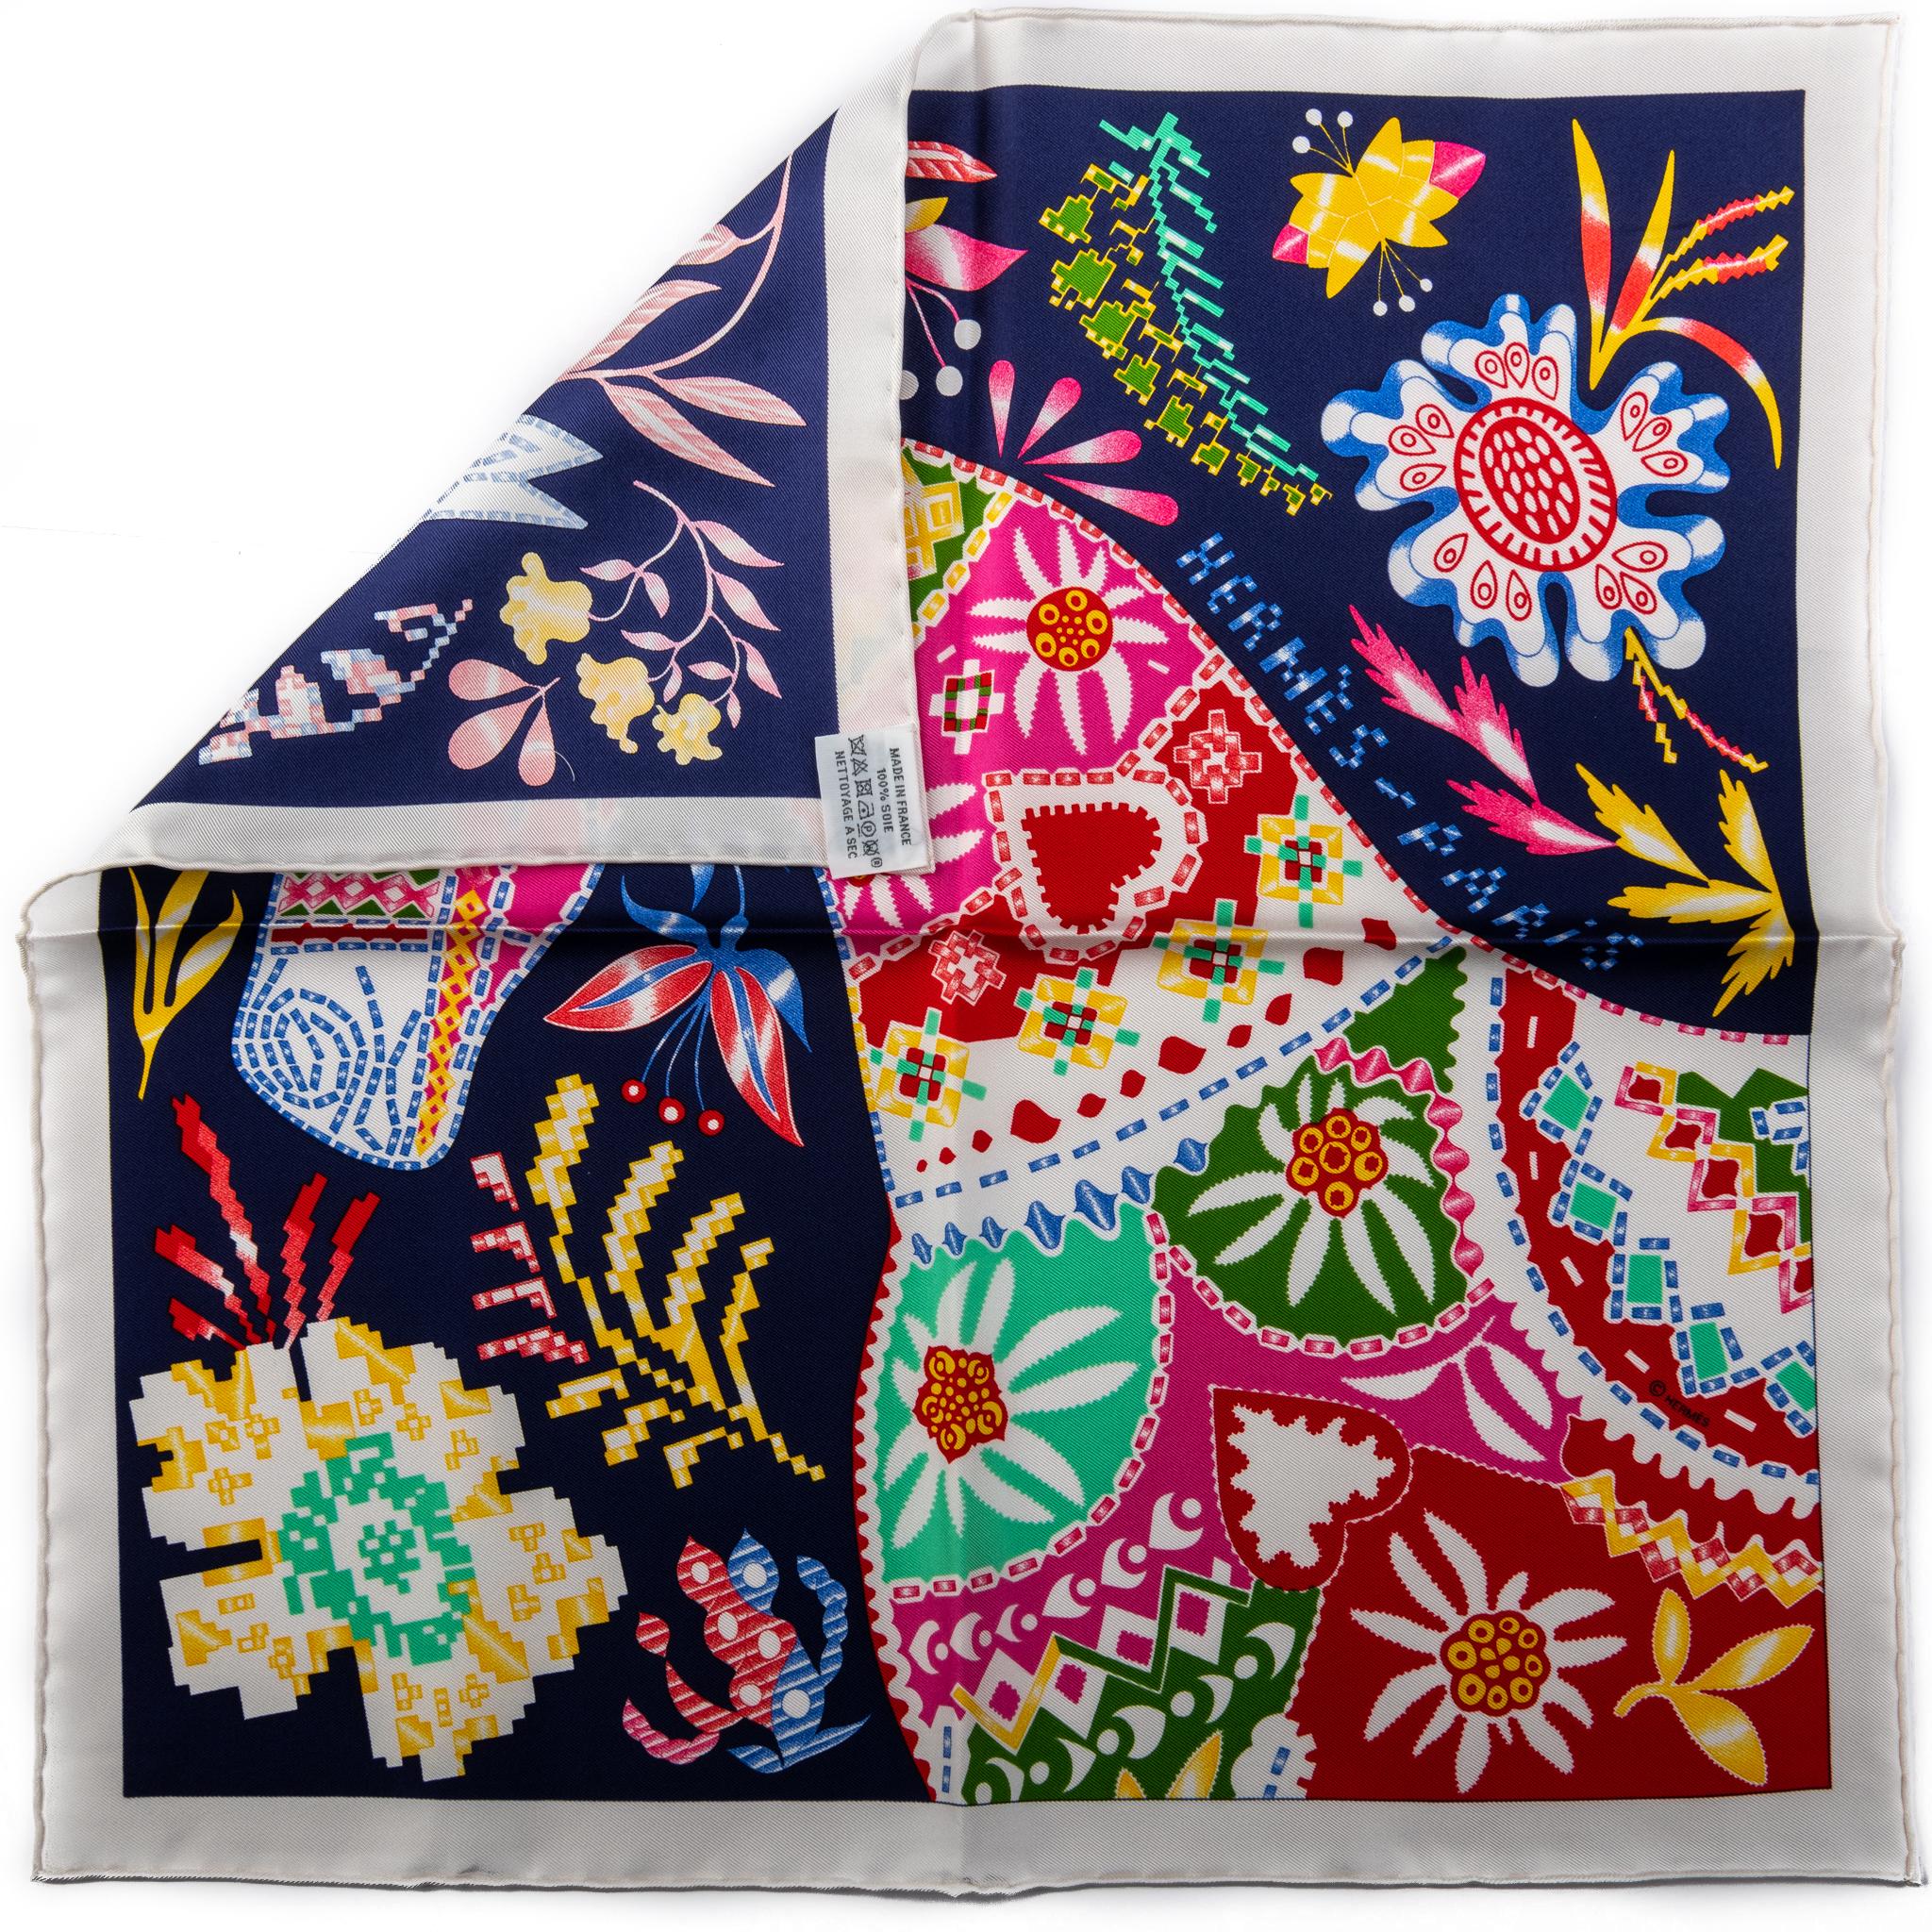 Hermès collectible multicolor bandana horse small silk gavroche scarf in blue. Hand-rolled edges. New in box.